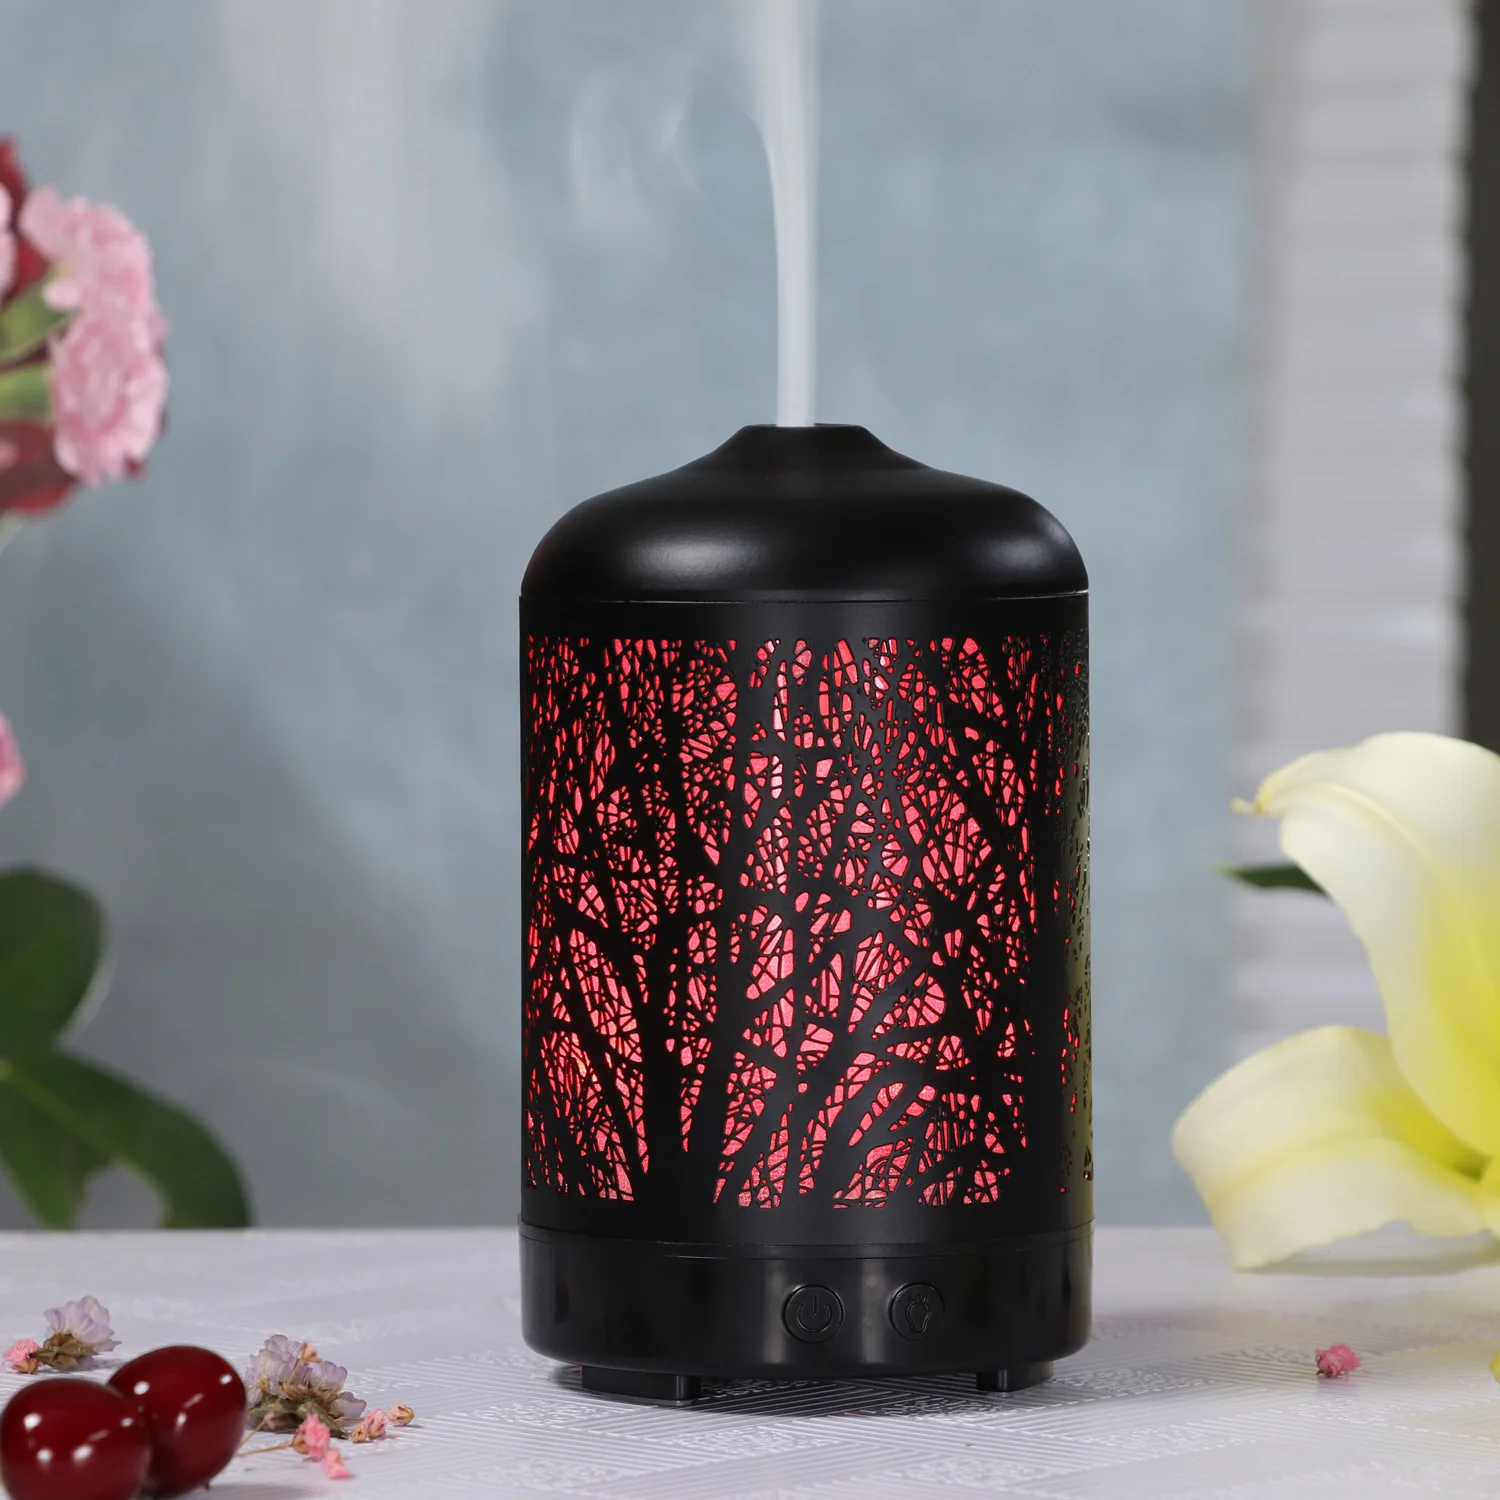 Branch Wrought Iron Aroma Diffuser Spray Humidifier Plug-in Mini Home Bedroom Office Desktop Humidification Humidifier Diffuser